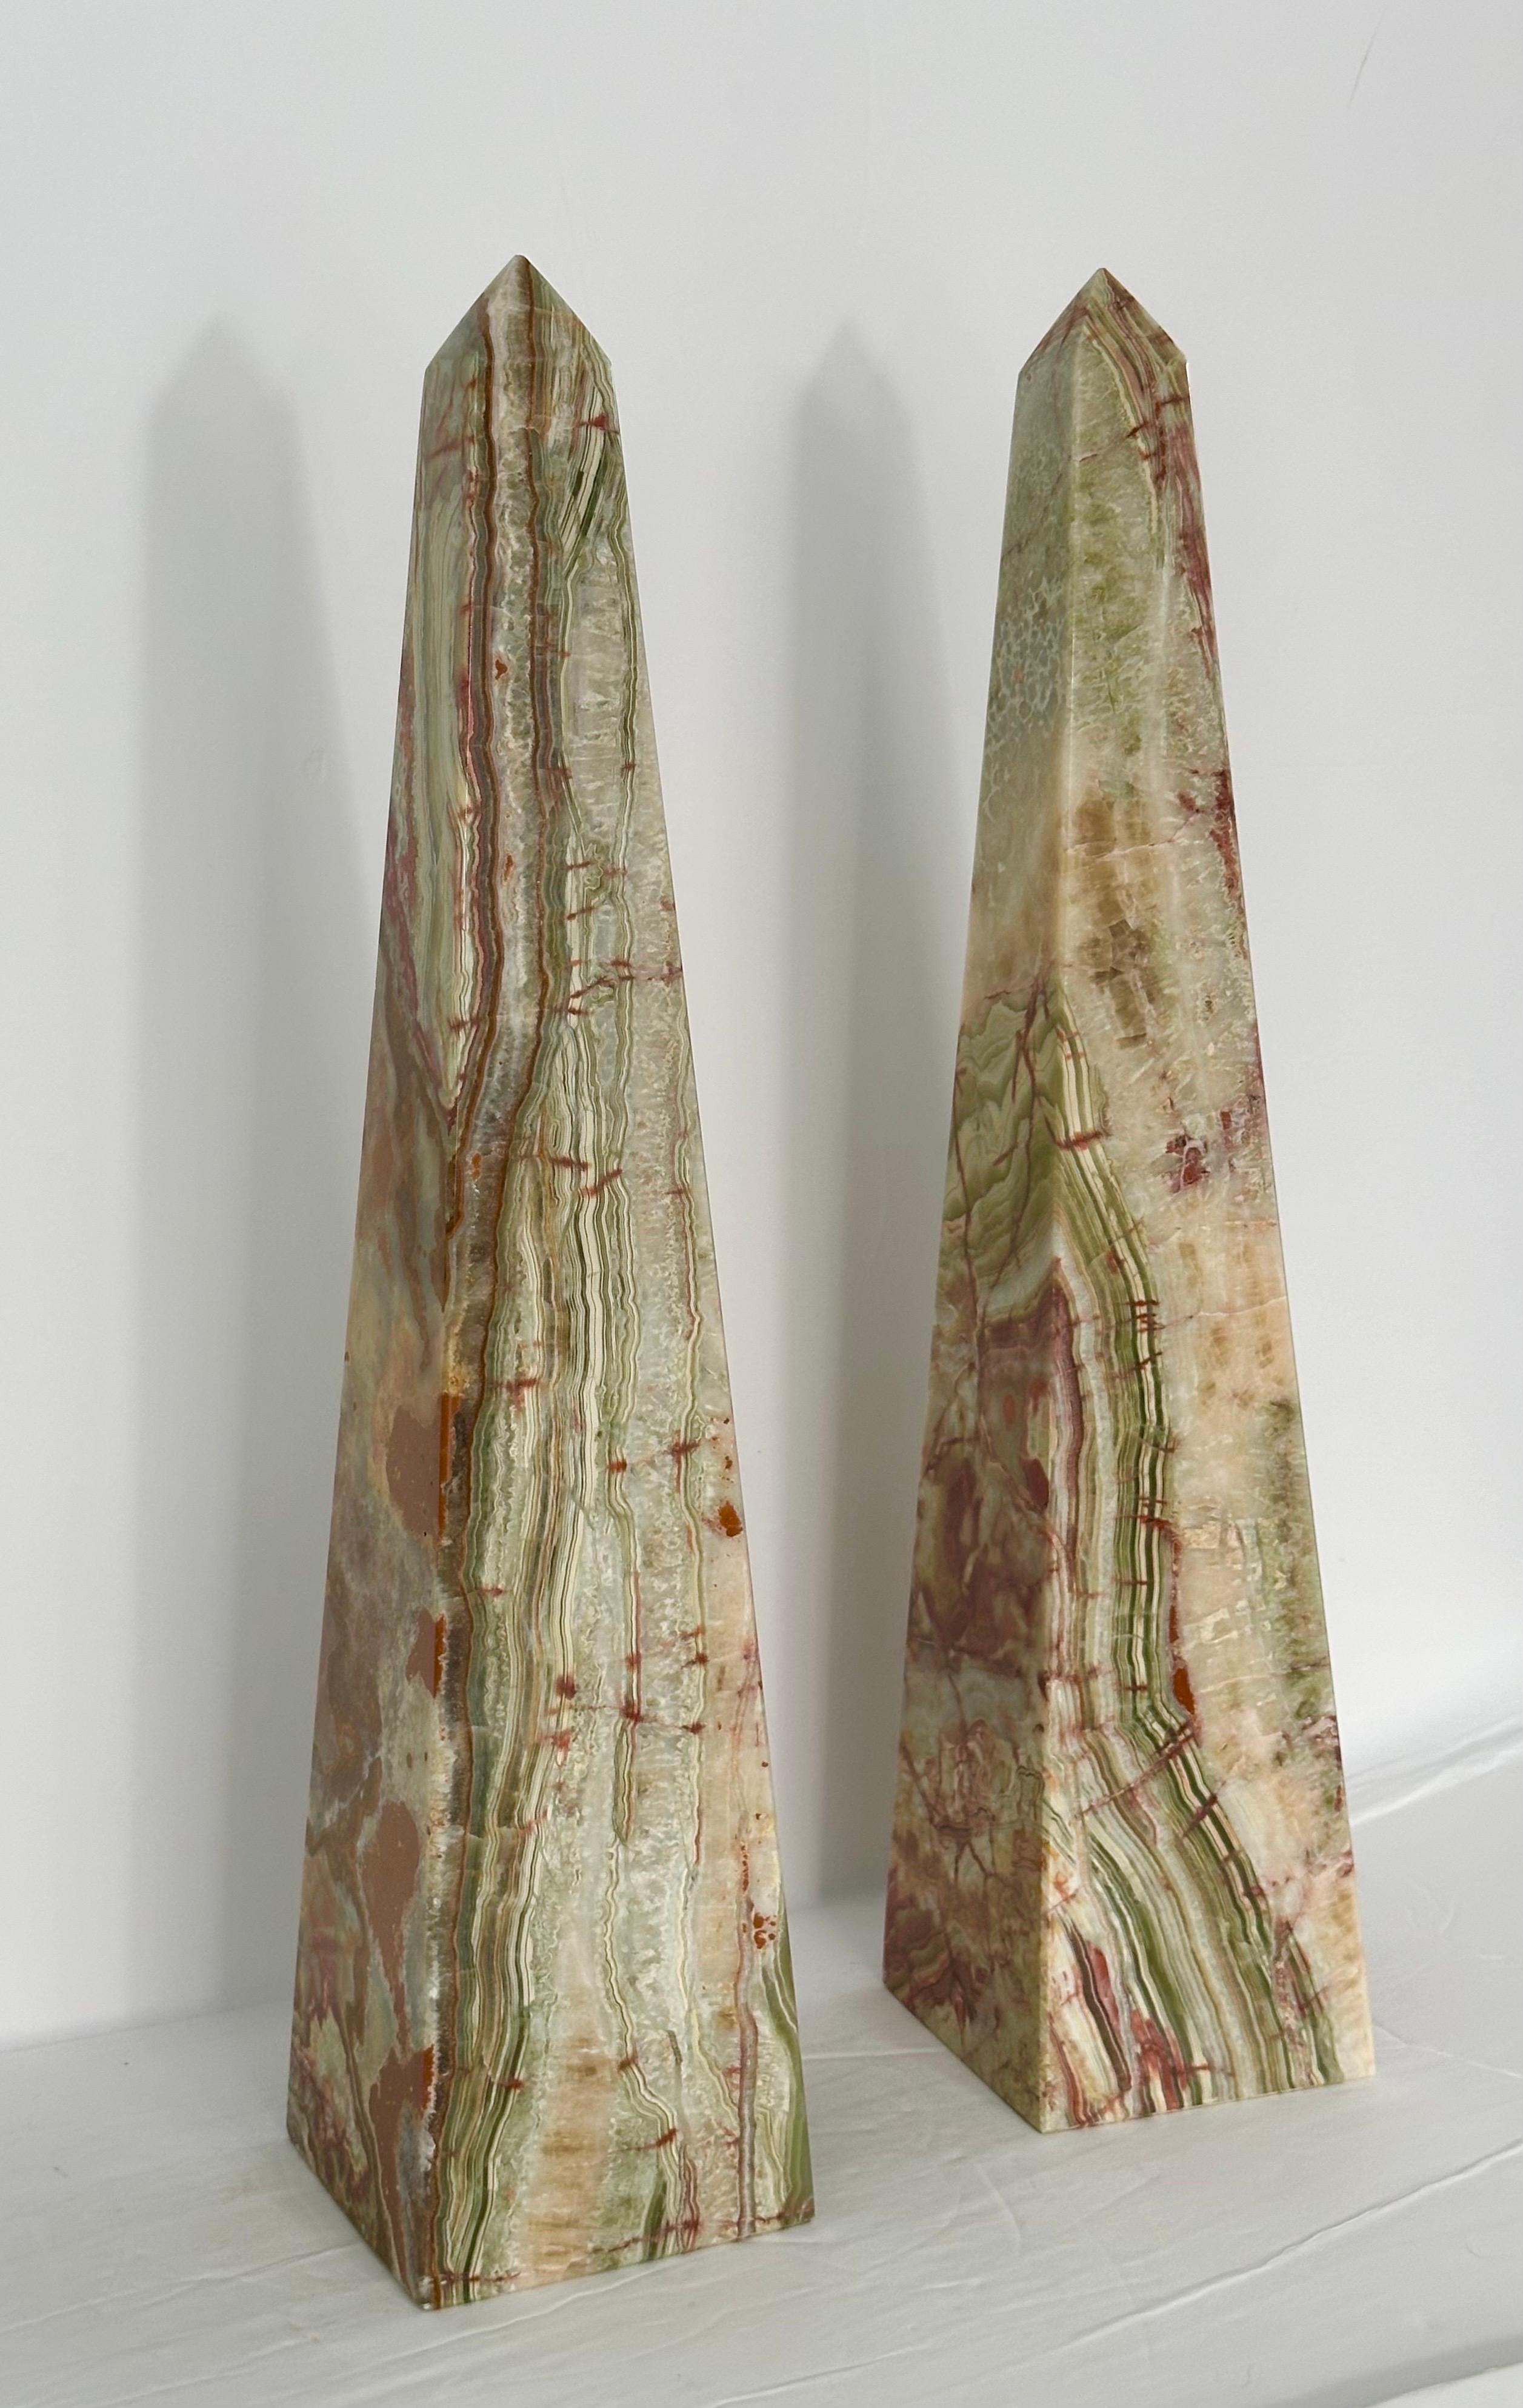 We are very pleased to offer a pair of beautiful stone obelisks, circa the 1970s.  Carved from fine onyx marble, these obelisks boast a mesmerizing color palette that includes shades of green, white, brown, and orange.  The vivid colors are